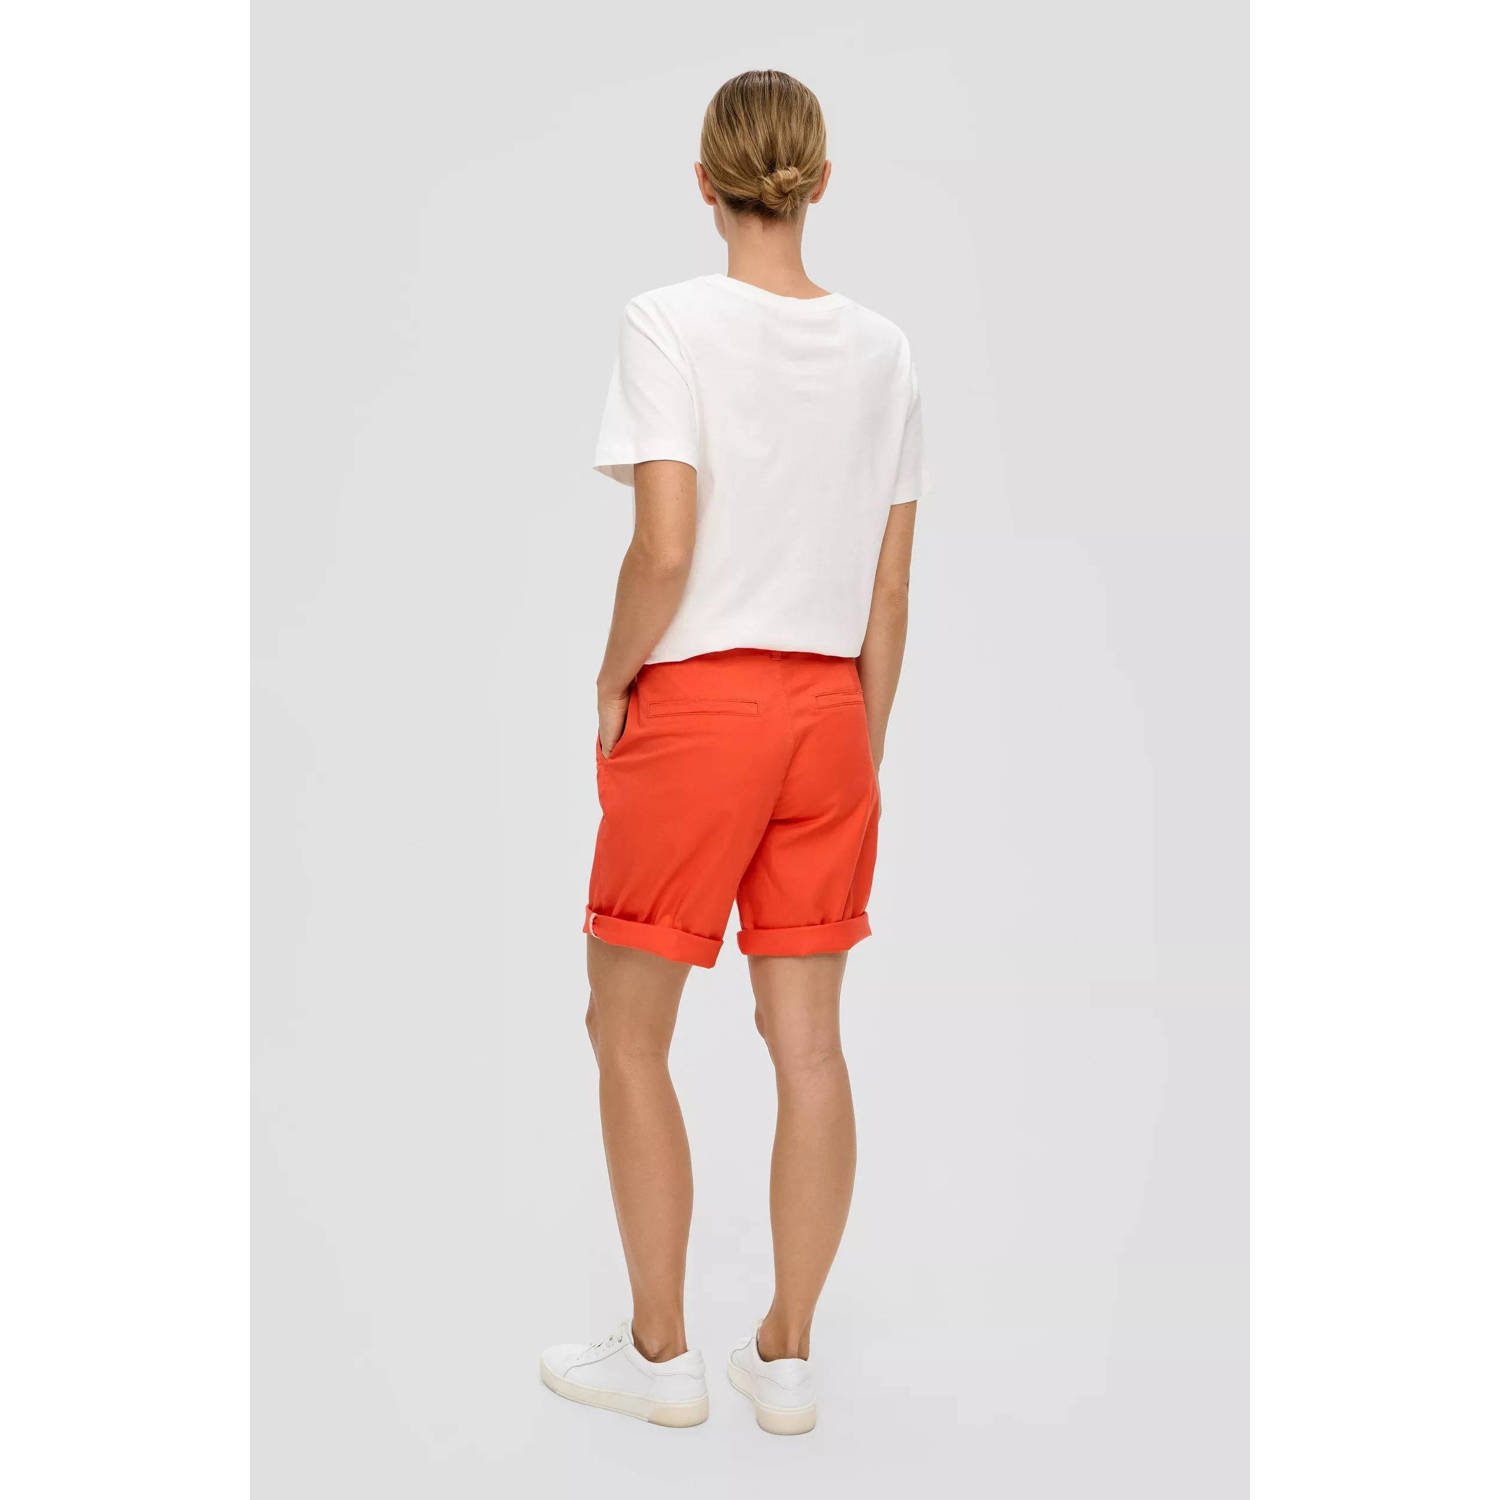 s.Oliver relaxed short oranje rood